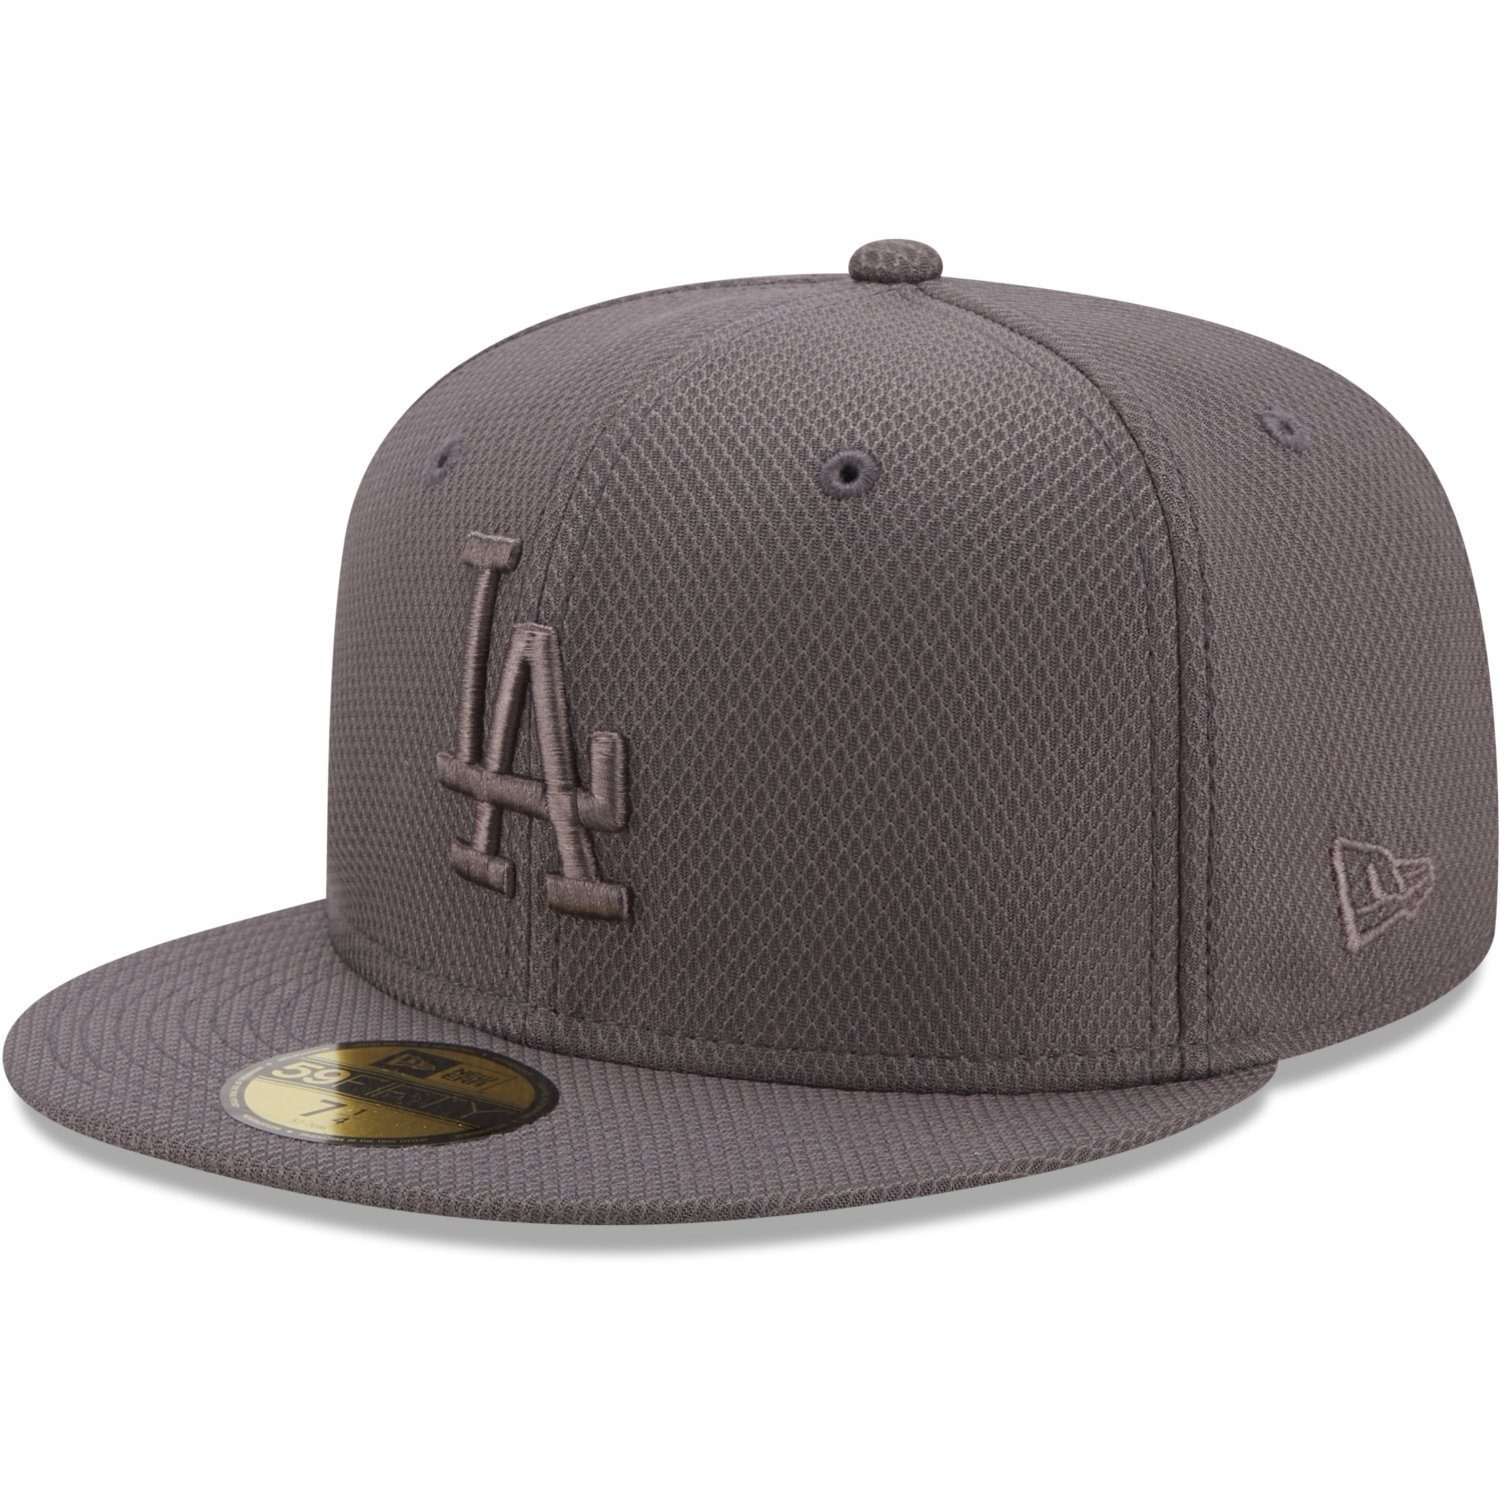 New Los DIAMOND Cap Dodgers Era 59Fifty Fitted Angeles